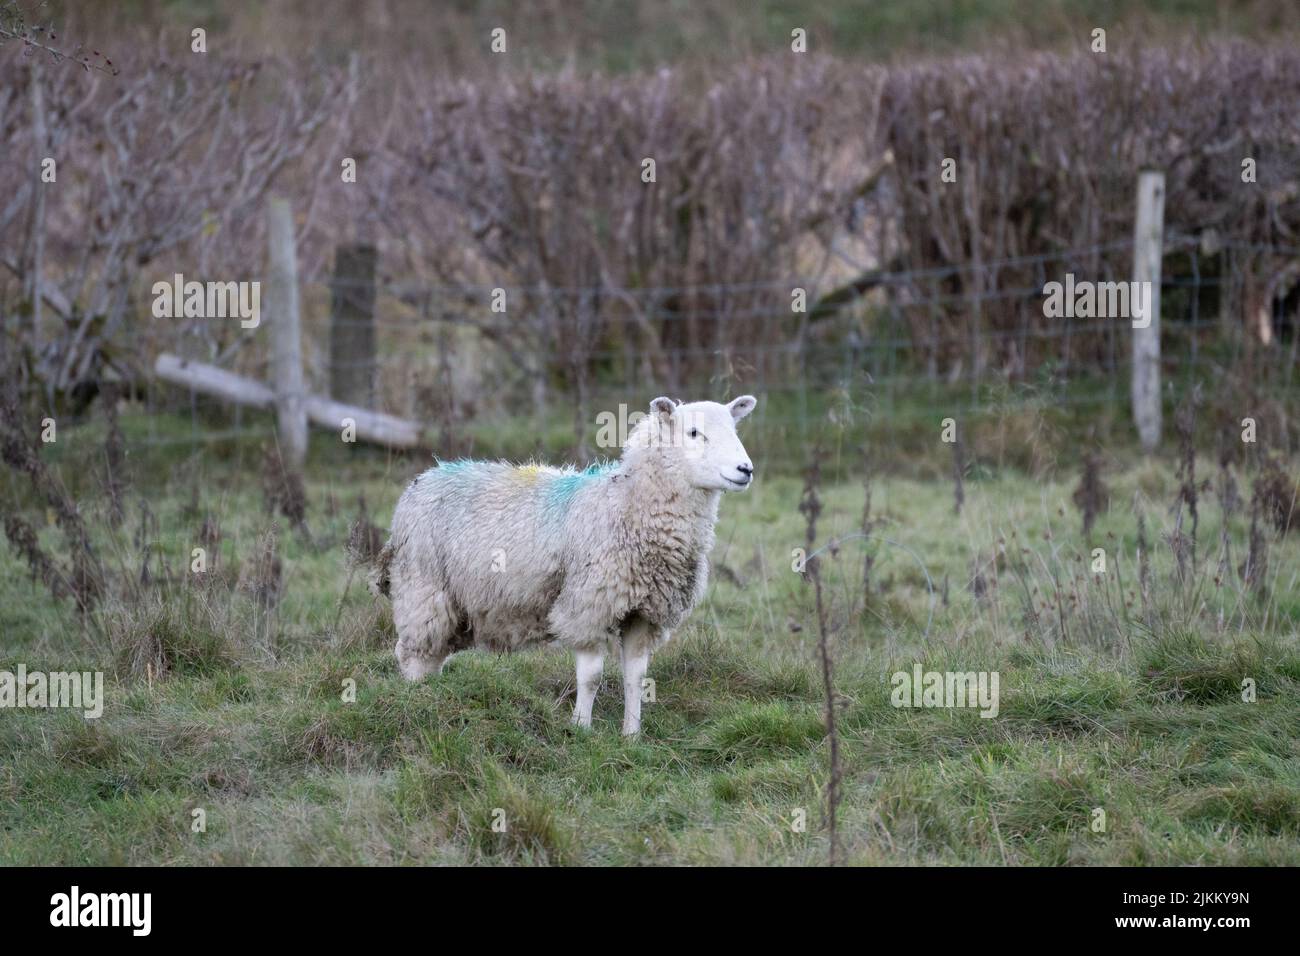 A white Texel sheep behind a wired fence in a field Stock Photo